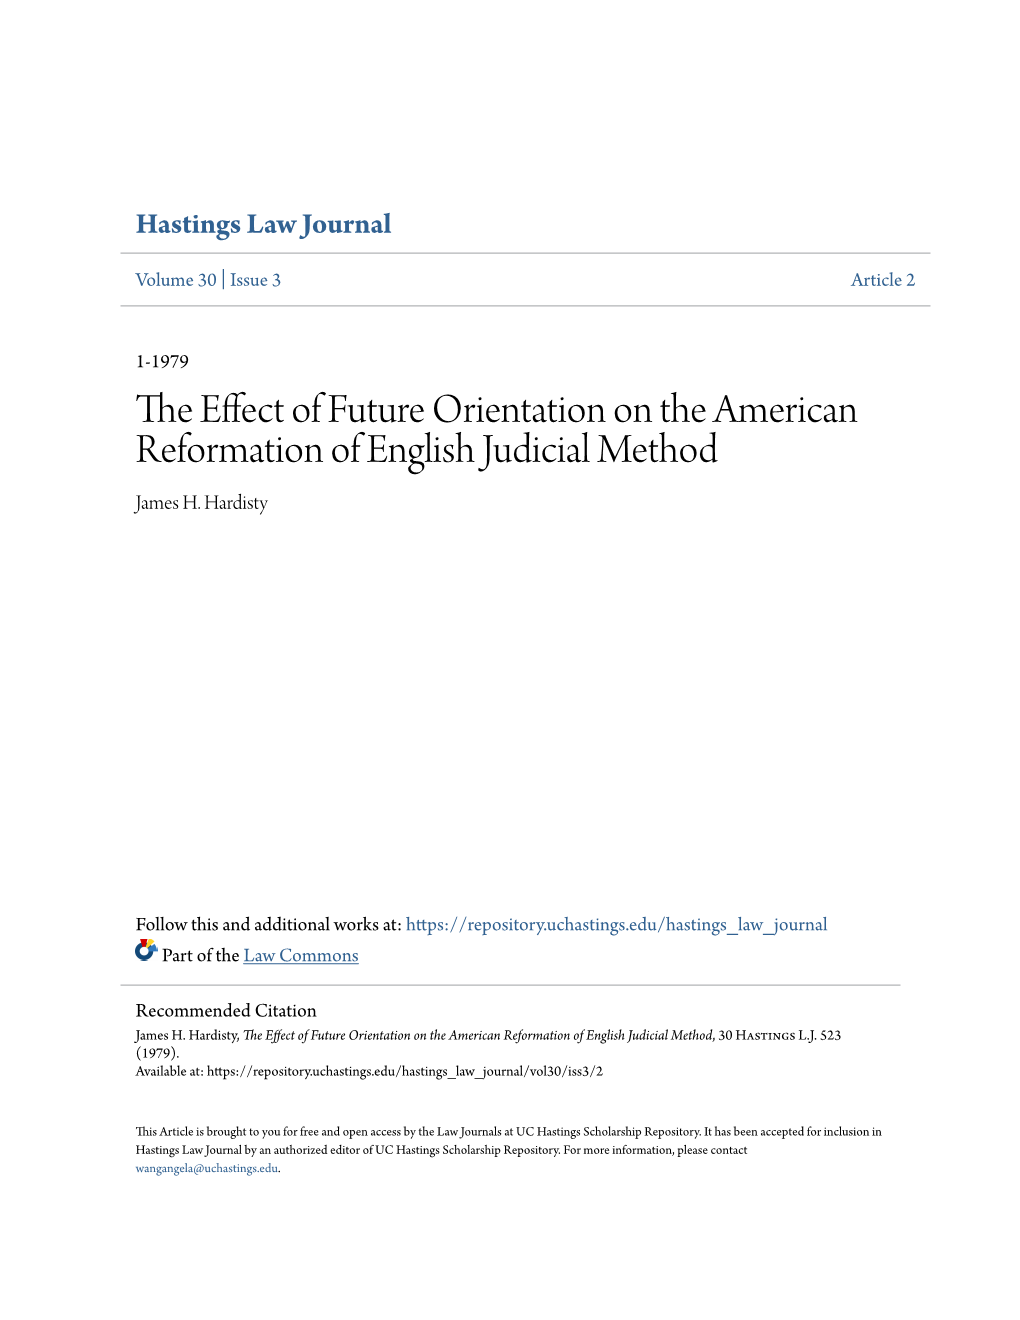 The Effect of Future Orientation on the American Reformation of English Judicial Method, 30 Hastings L.J